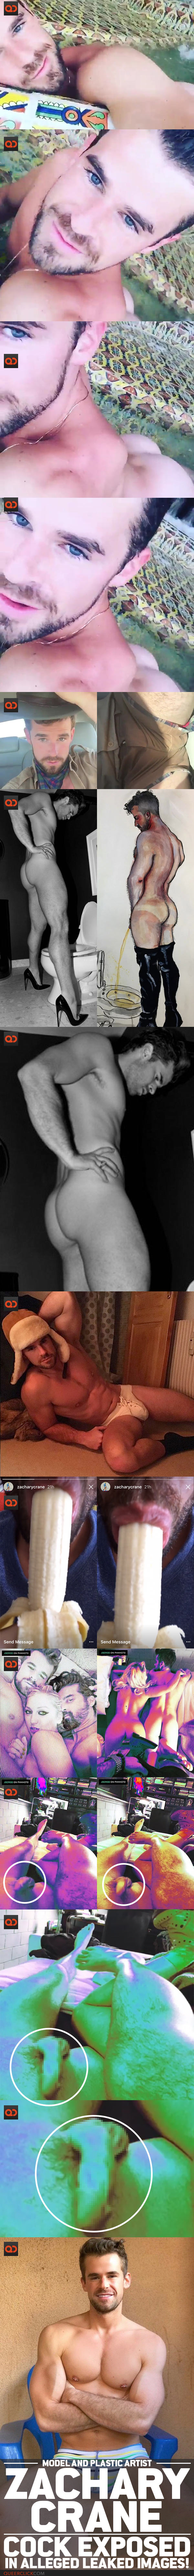 Zachary Crane, Model And Plastic Artist, Cock Exposed In Alleged Leaked Snap!